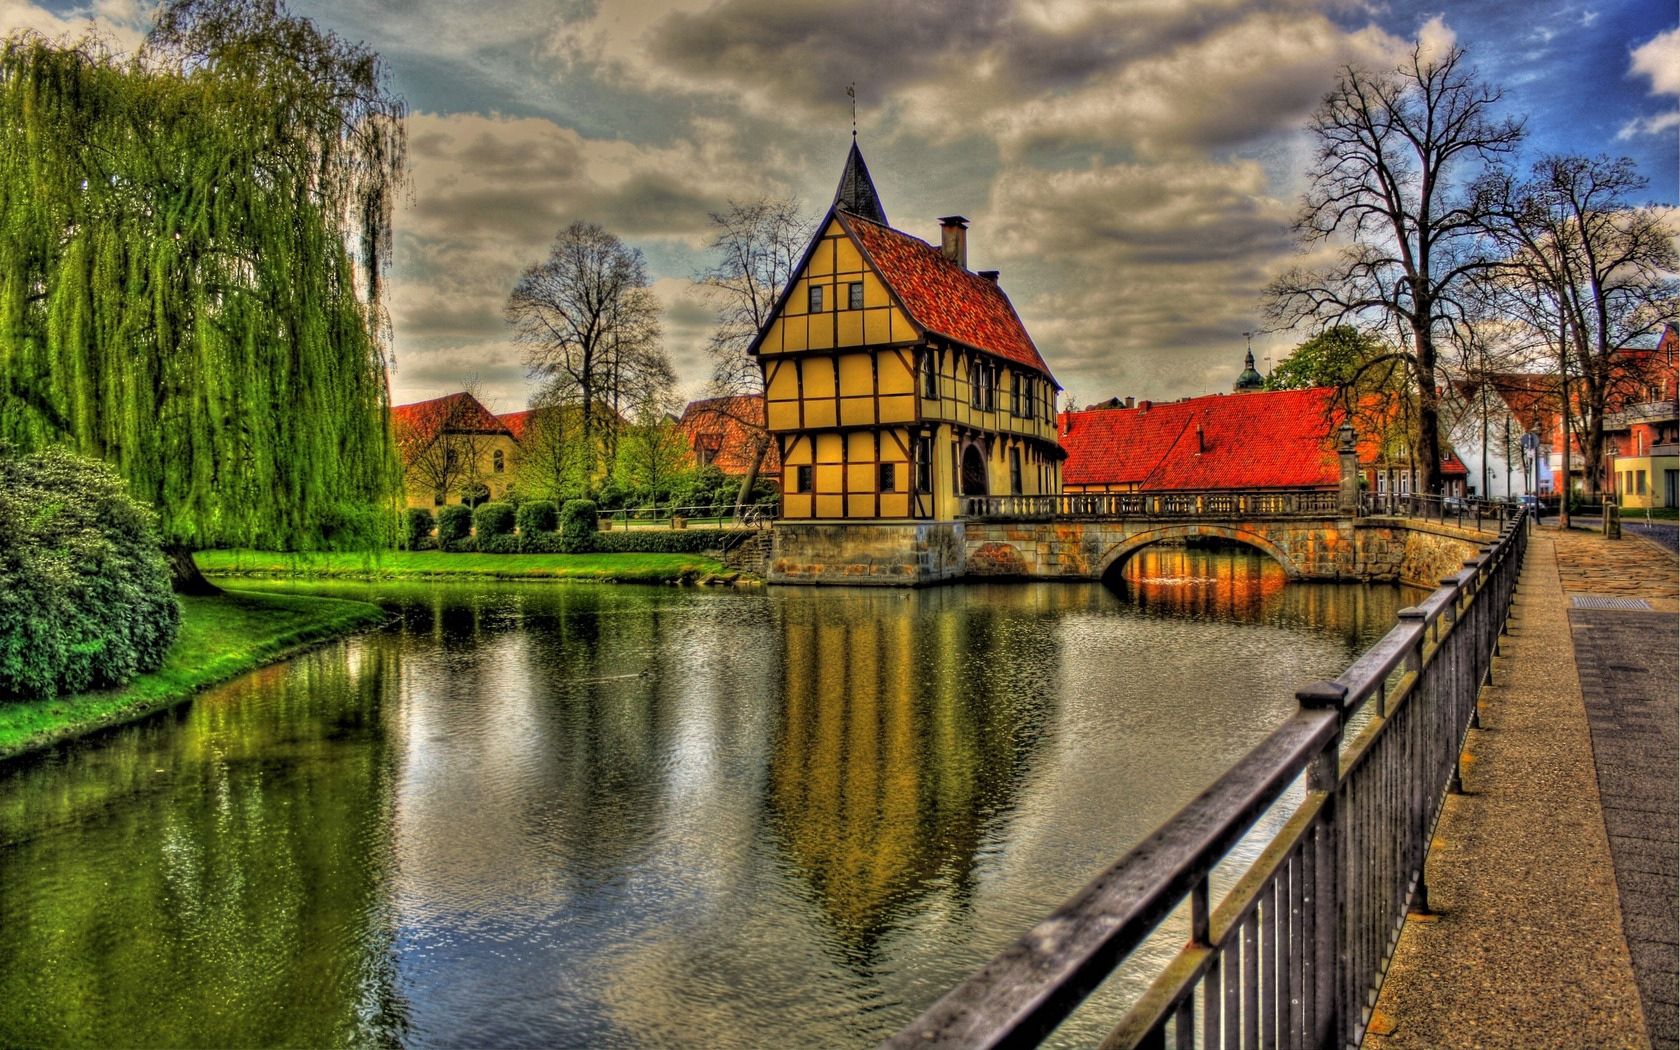 architecture, hdr, rivers, cities, green, water, houses, trees, grass, sky, clouds, city, reflection, road, beauty, house, bridge, colors, color, view, colorful, germany 1080p